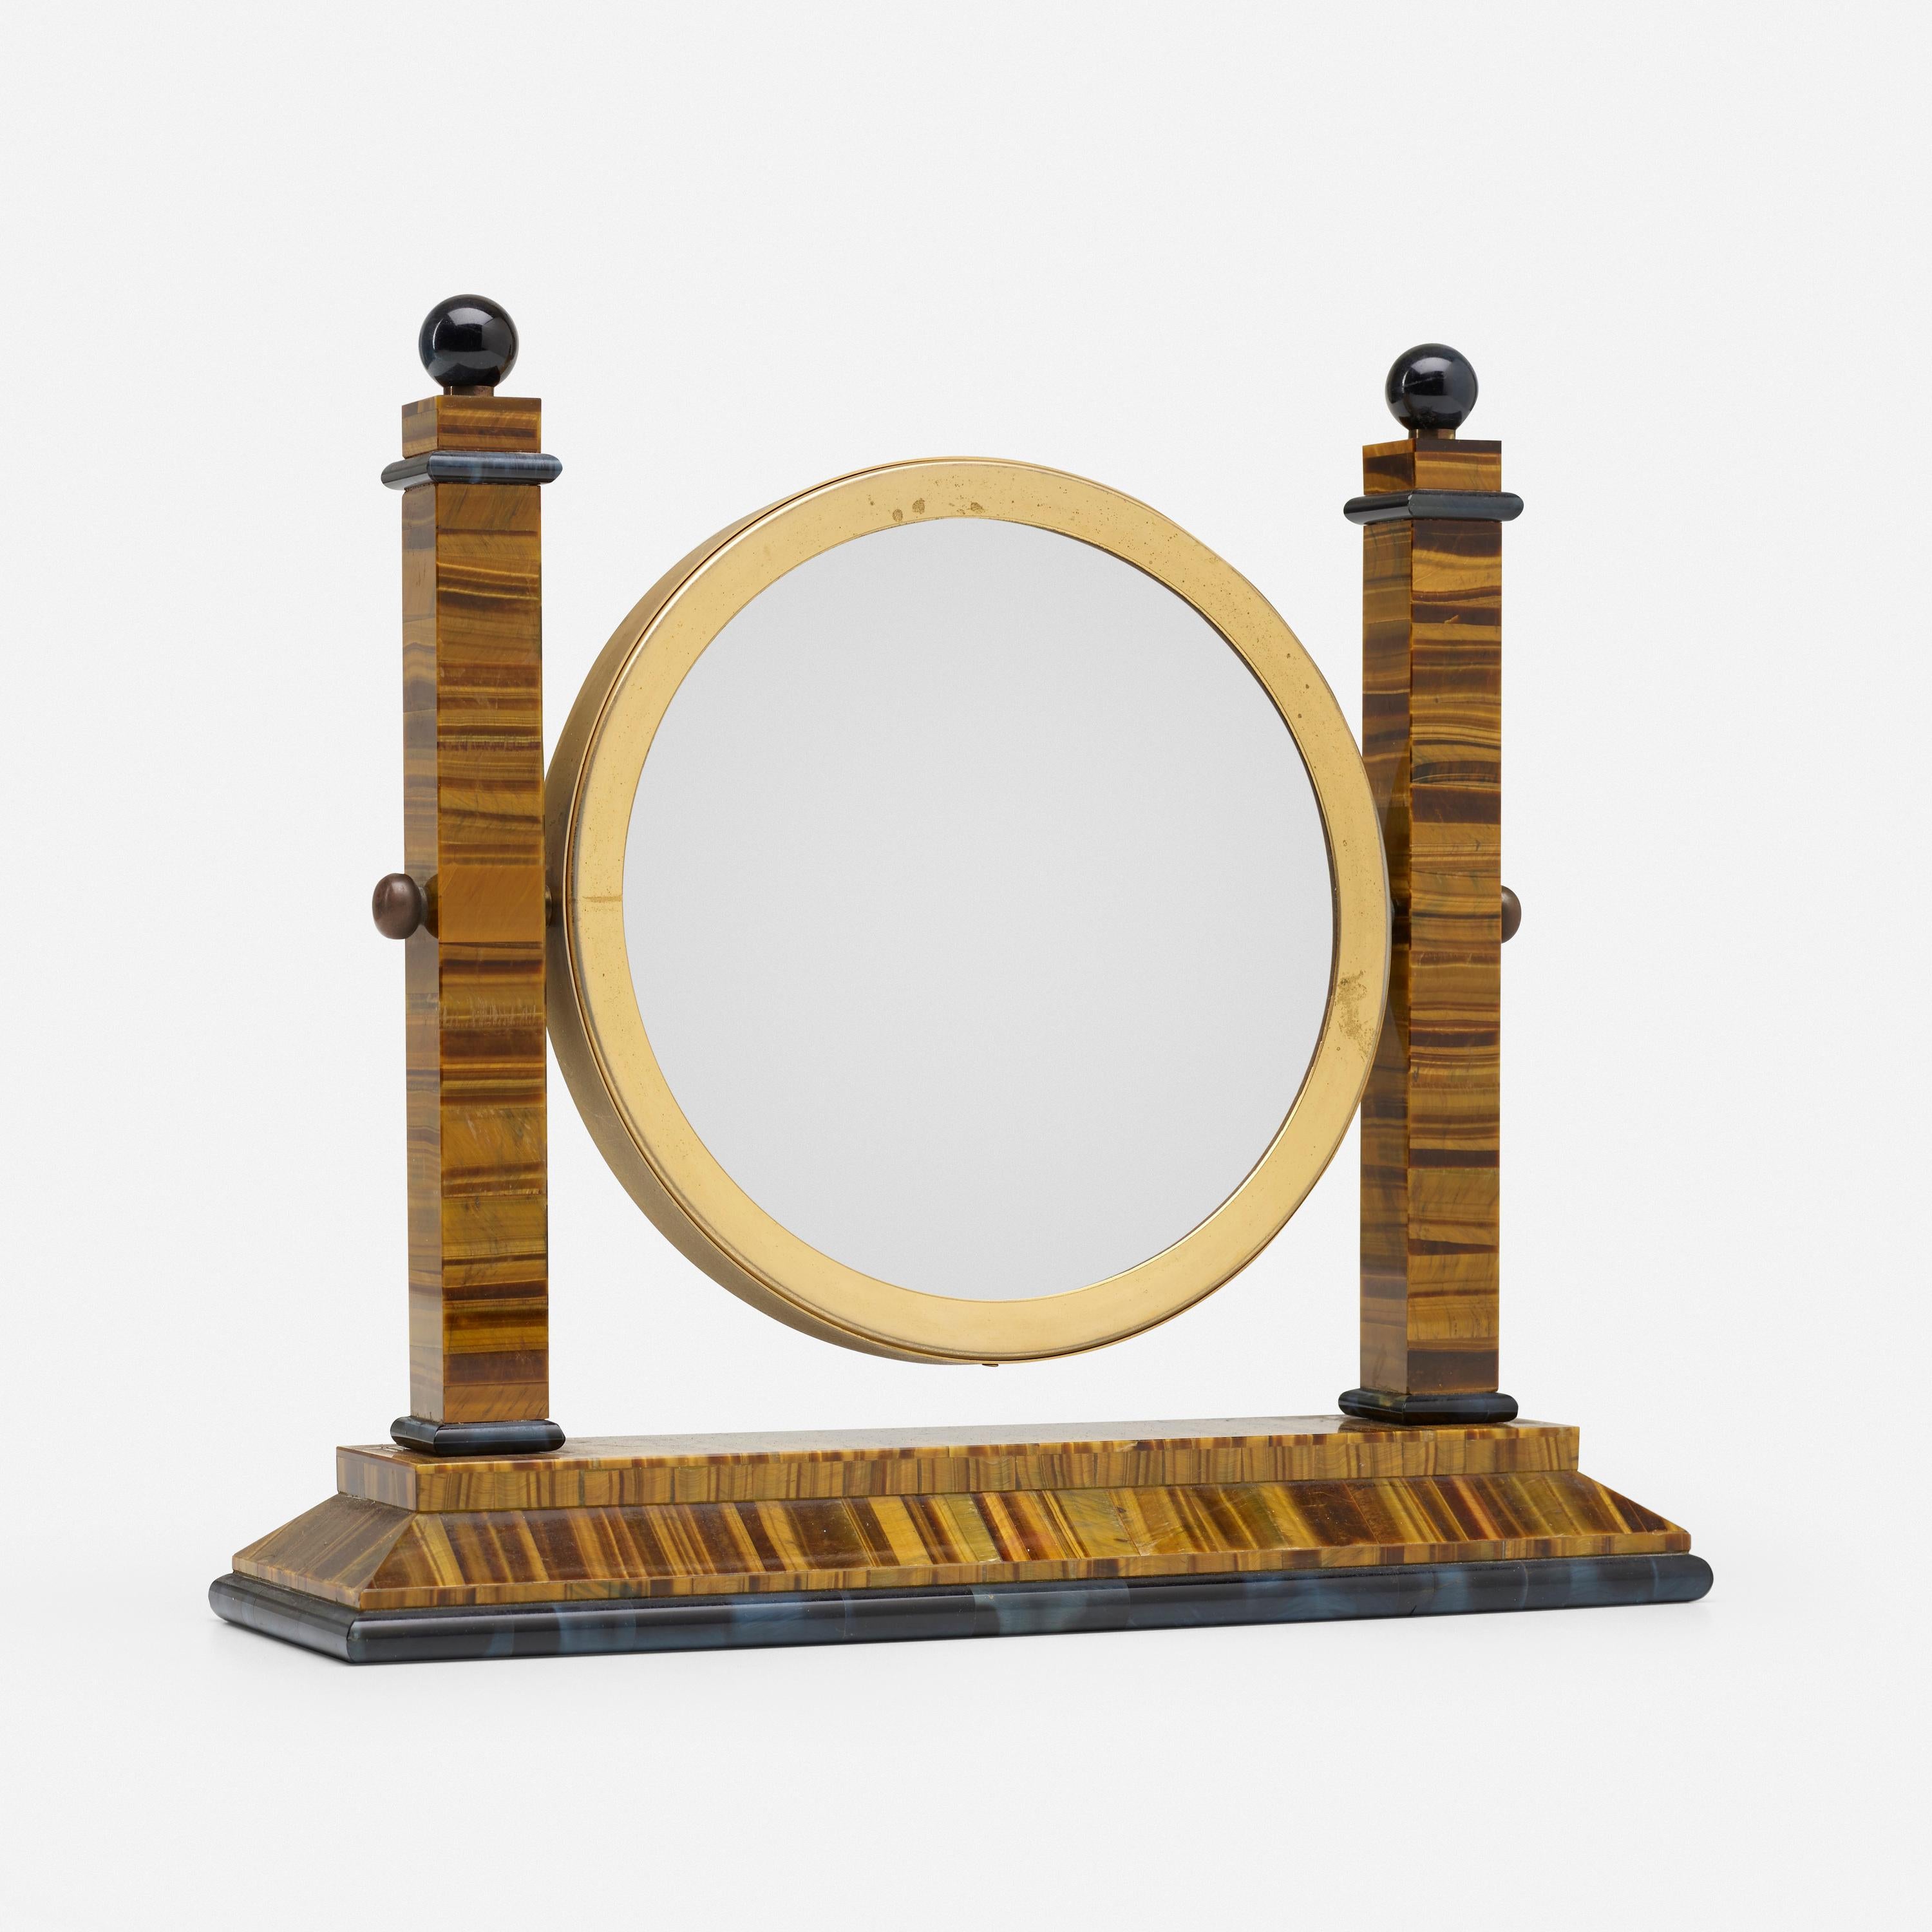 Agate cat's and tiger's eye precious stone, brass table mirror by Christian Dior. Marked under the base: 